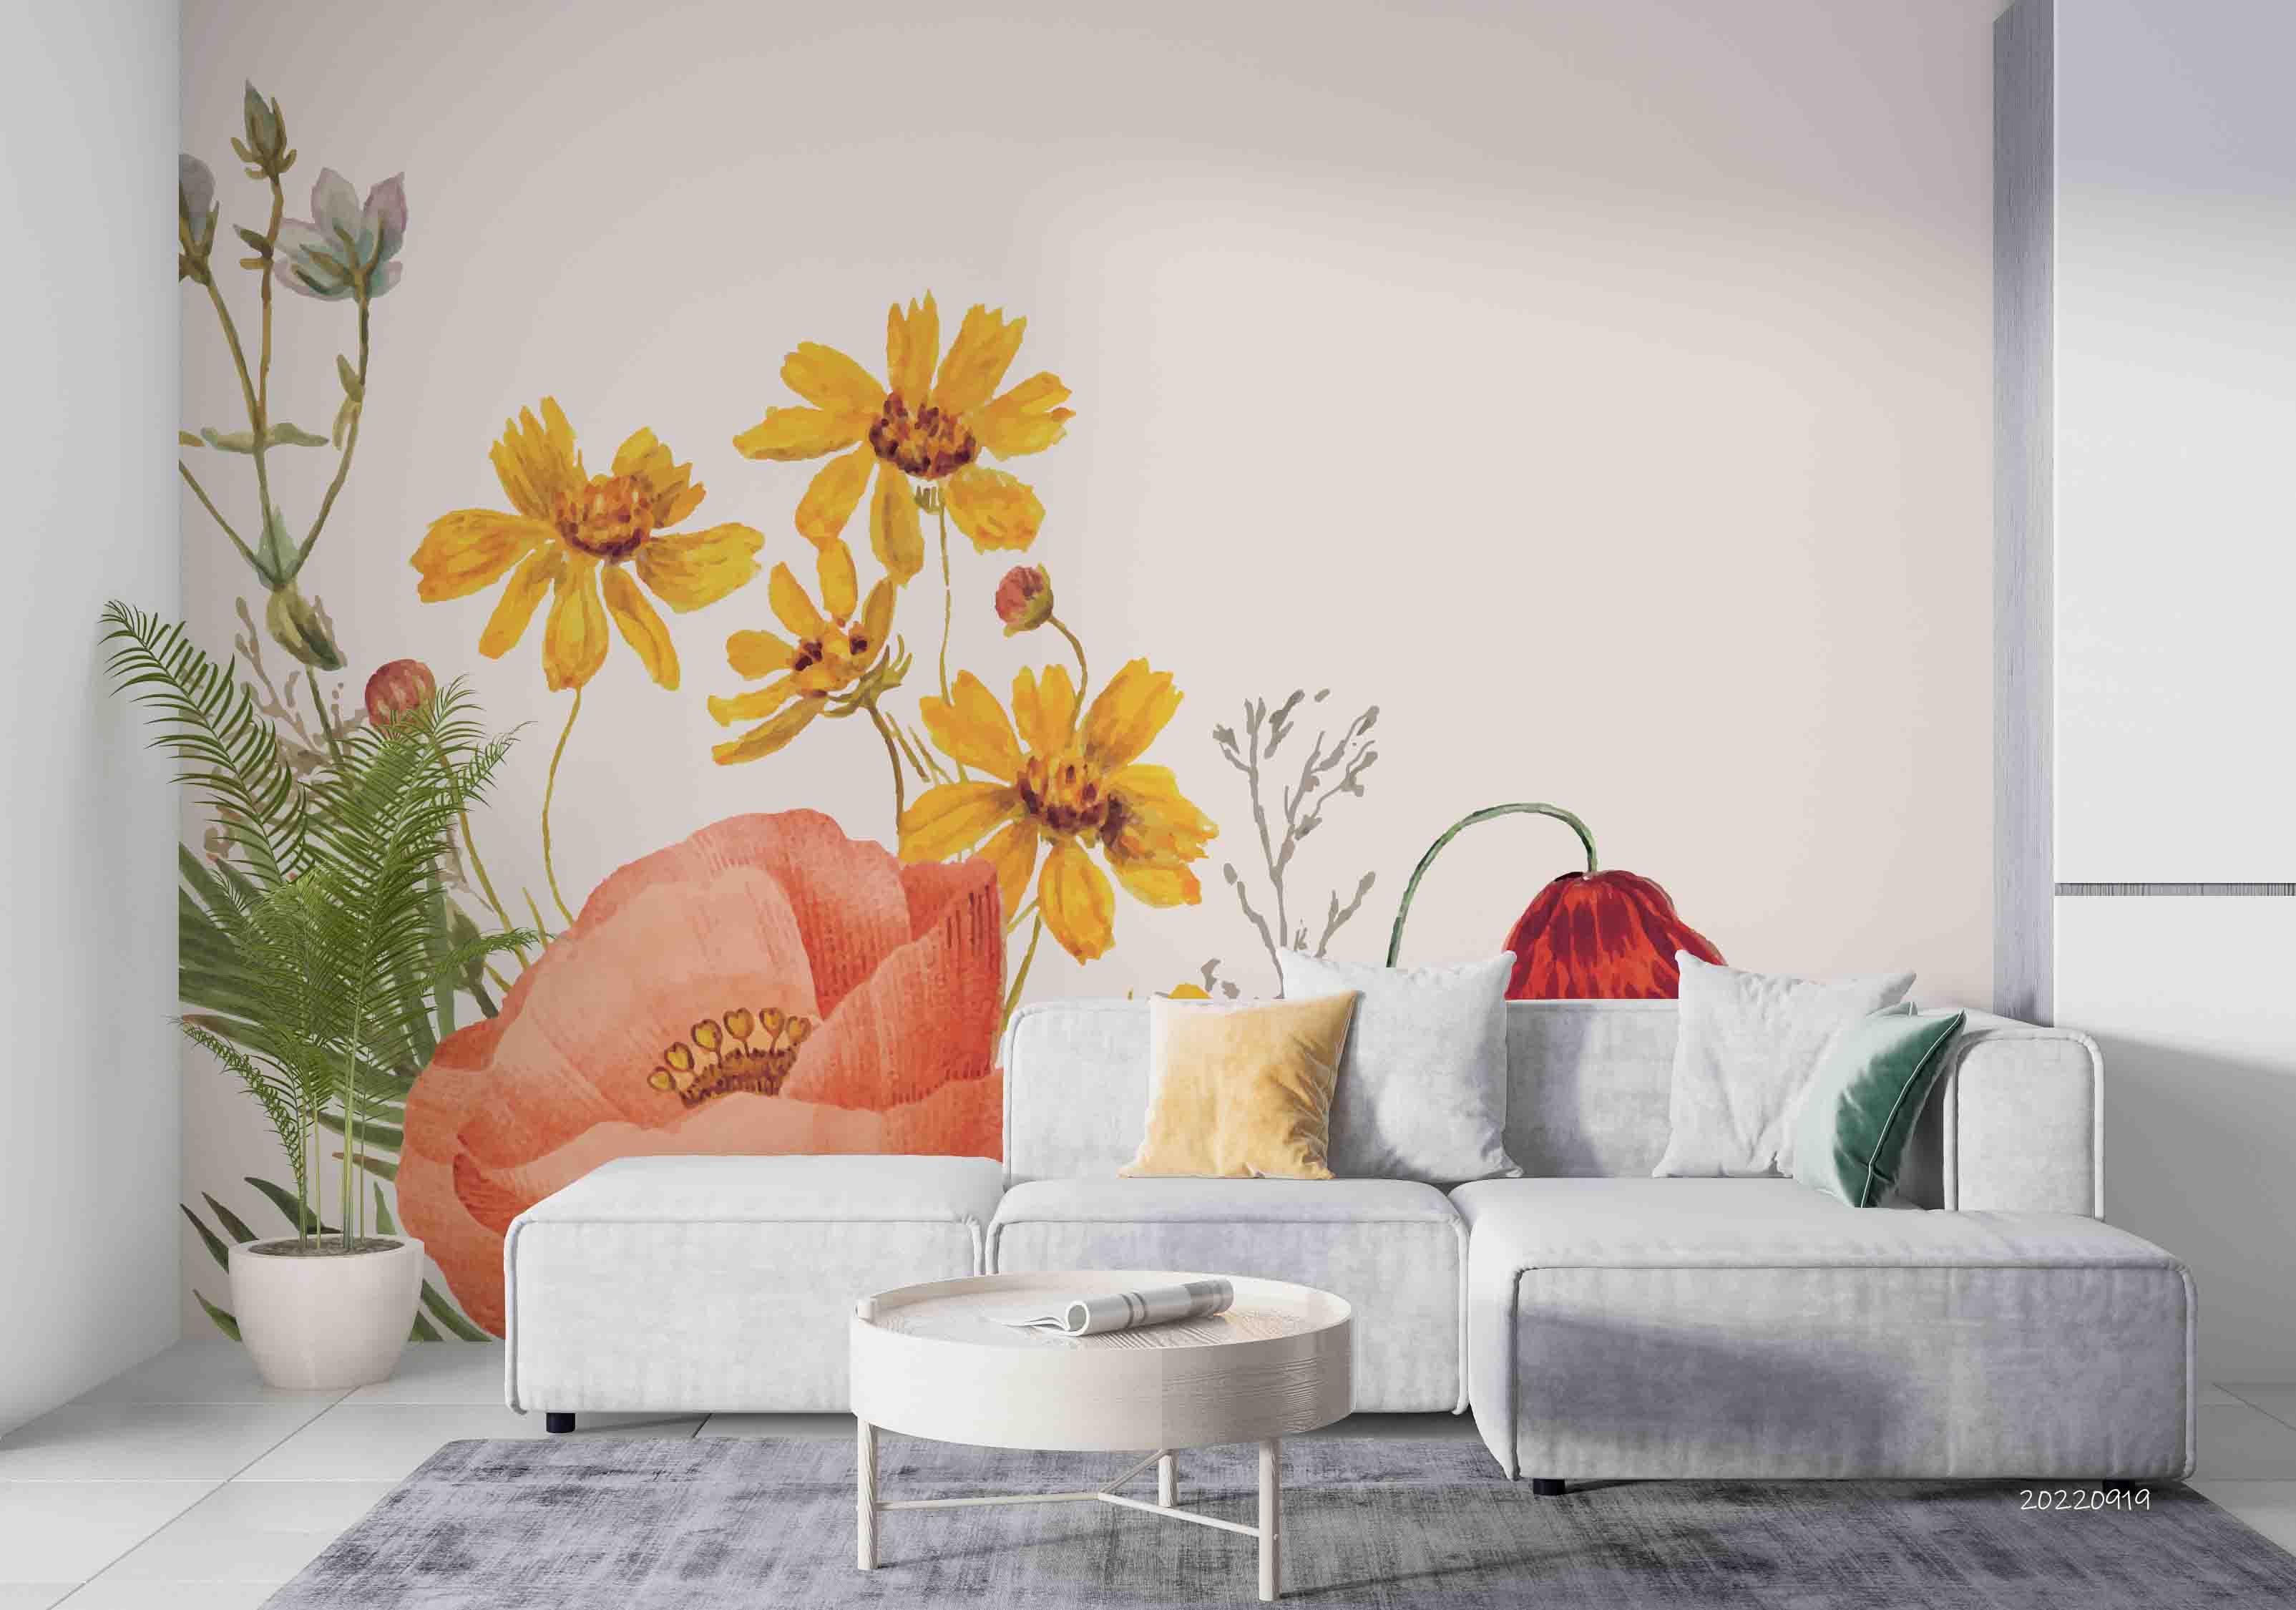 3D Vintage Yellow Floral Background Wall Mural Wallpaper GD 3424- Jess Art Decoration